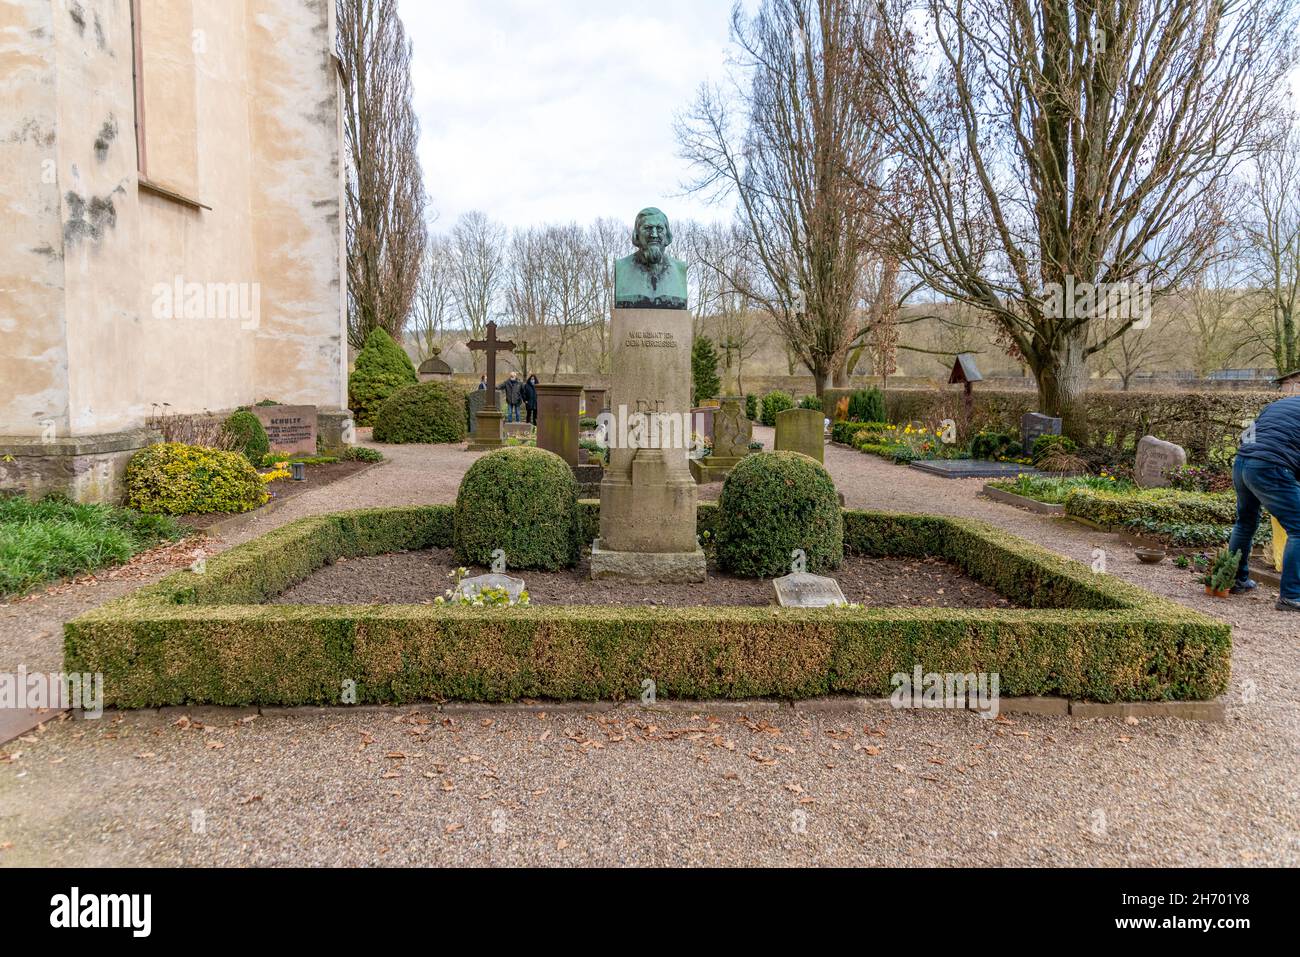 HOEXTER, GERMANY - Apr 04, 2021: The grave of August Heinrich Hoffmann von Fallersleben in Hoexter surrounded by plants in Germany Stock Photo